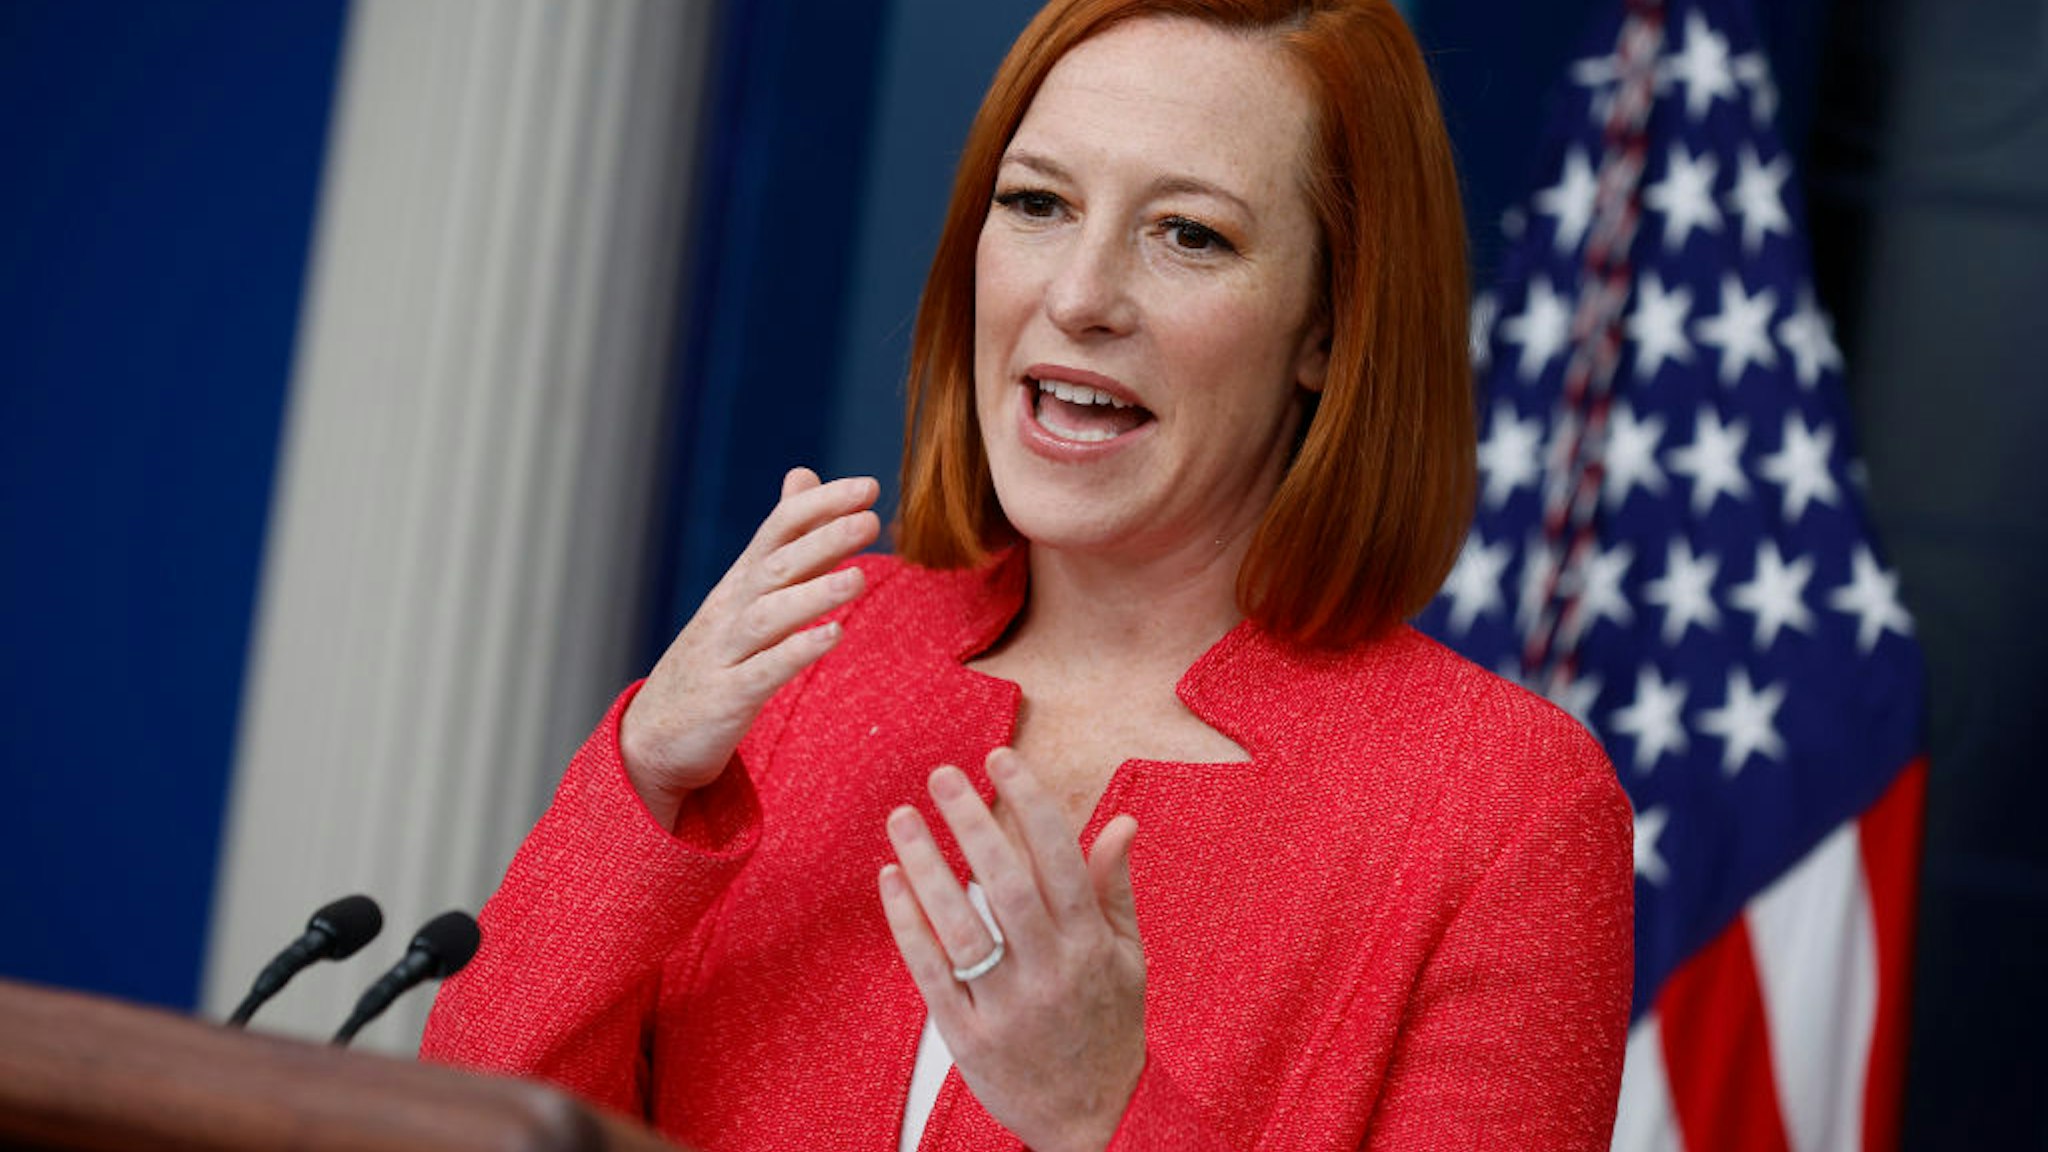 WASHINGTON, DC - JANUARY 14: White House Press Secretary Jen Psaki talks to reporters in the Brady Press Briefing Room at the White House on January 14, 2022 in Washington, DC. Psaki took questions about Russia's threat to Ukraine, the ongoing response by the Biden Administration to the coronavirus pandemic and the struggle for Democrats to get voting rights legislation through the Congress. (Photo by Chip Somodevilla/Getty Images)